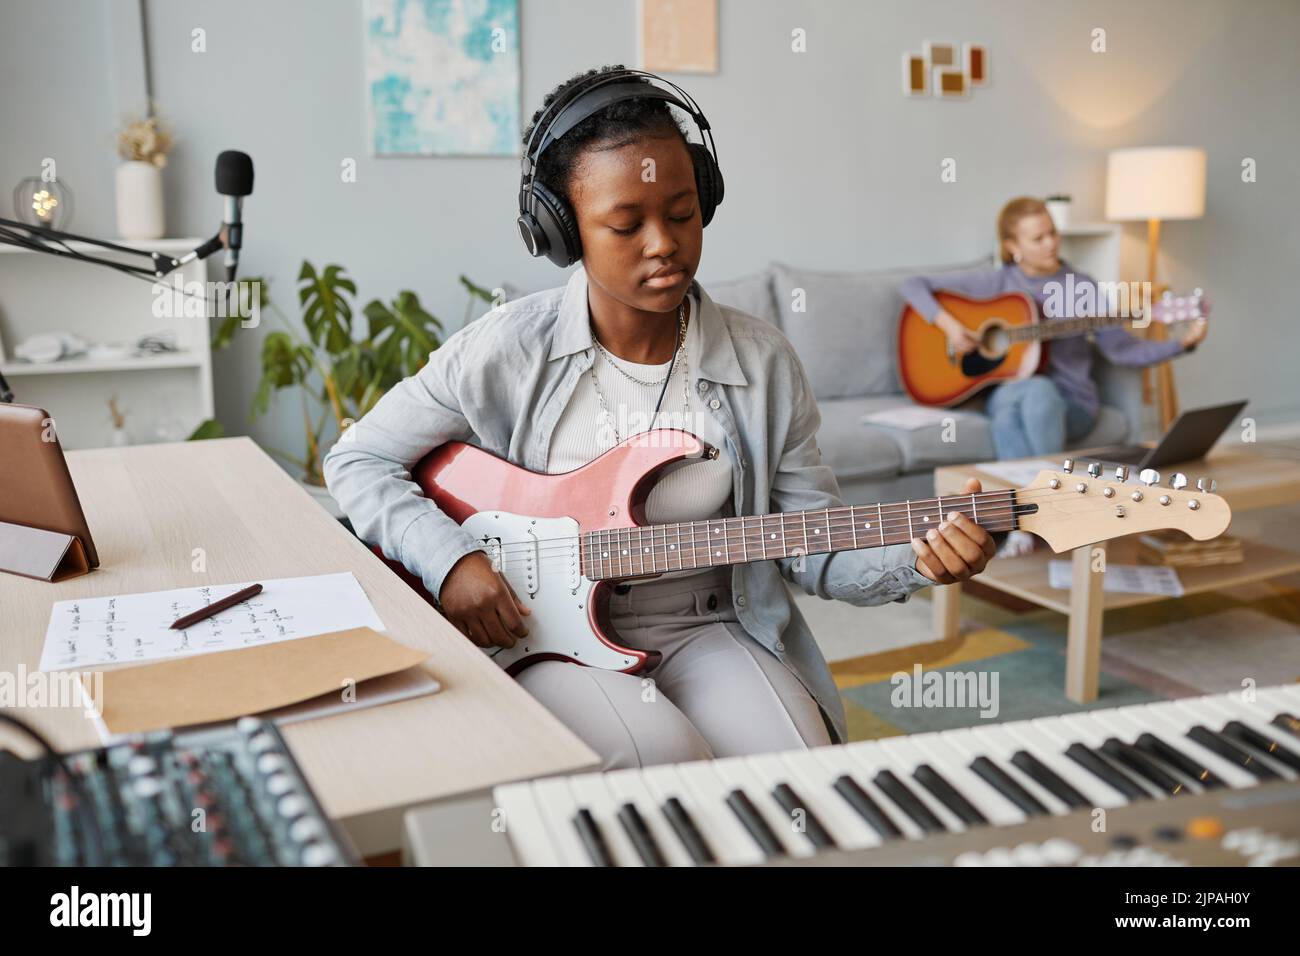 Portrait of young black woman playing electric guitar in studio and composing music, copy space Stock Photo